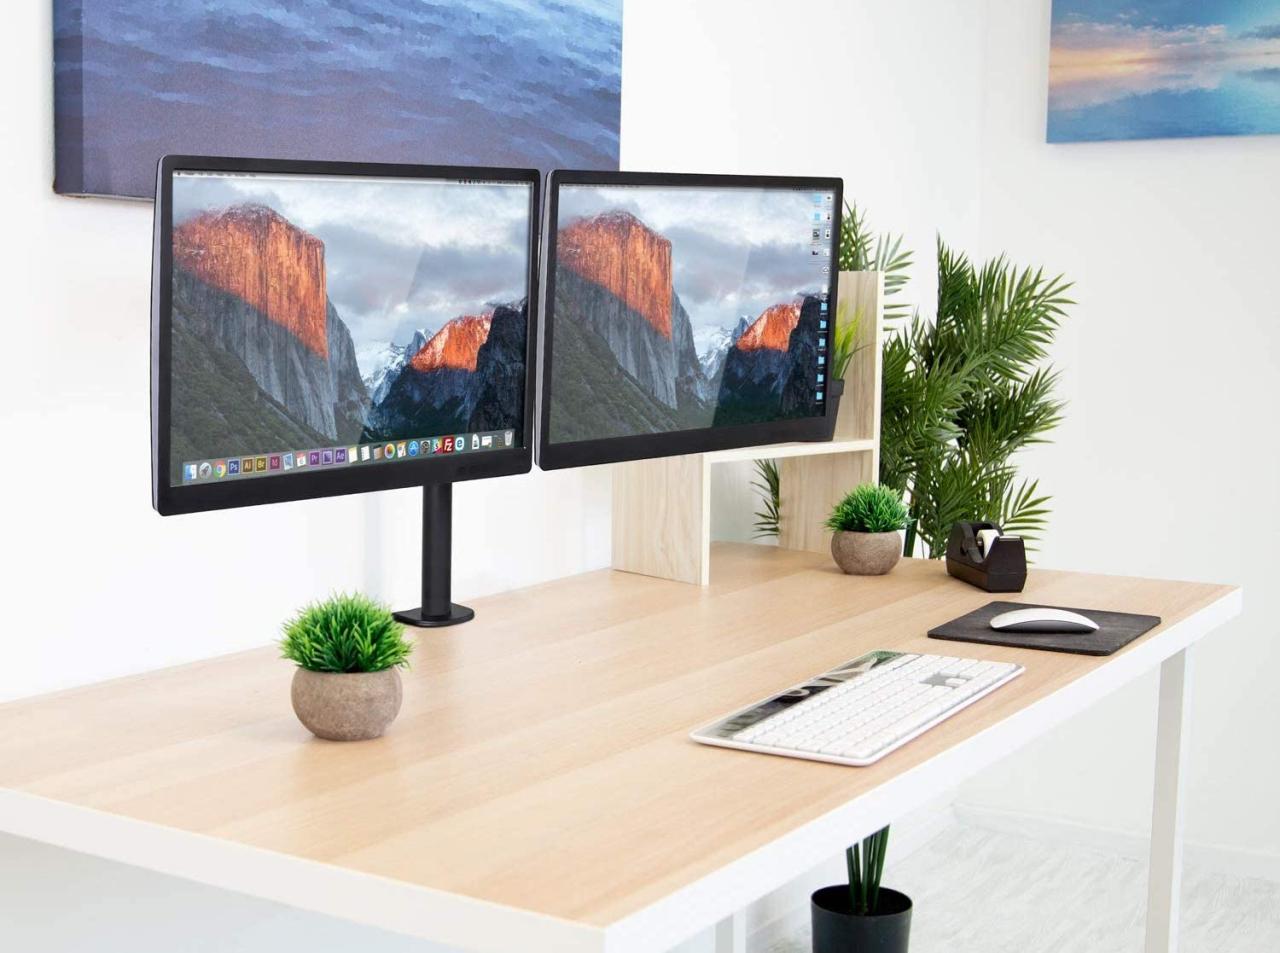 How To Use Two Monitors To Increase Productivity On PC or Mac In 2021